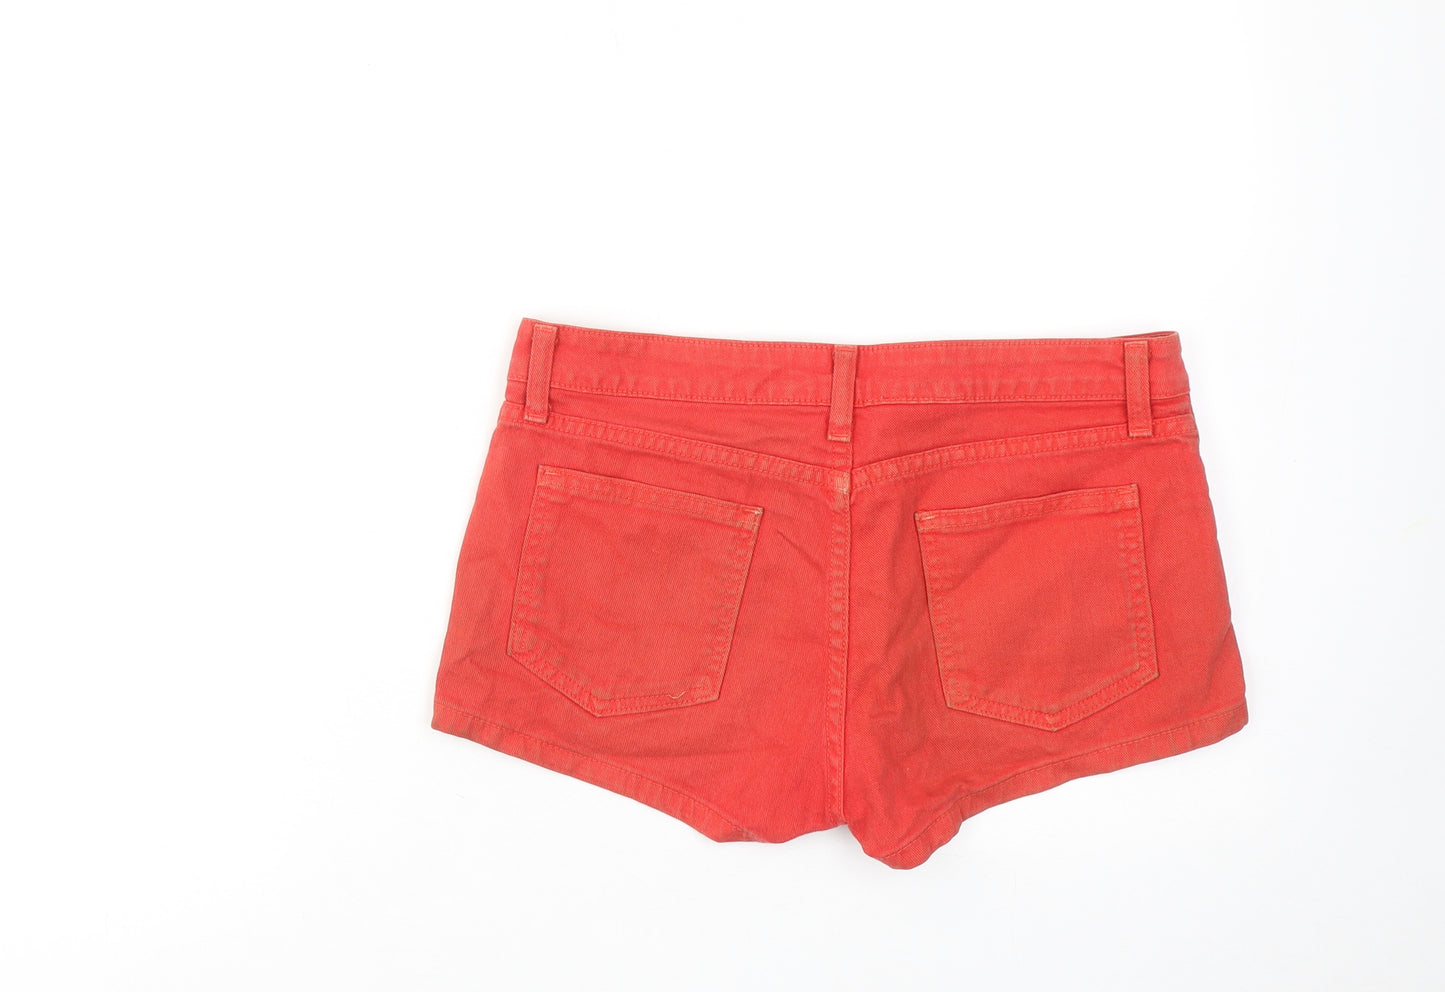 American Apparel Womens Red Cotton Hot Pants Shorts Size 29 in Regular Zip